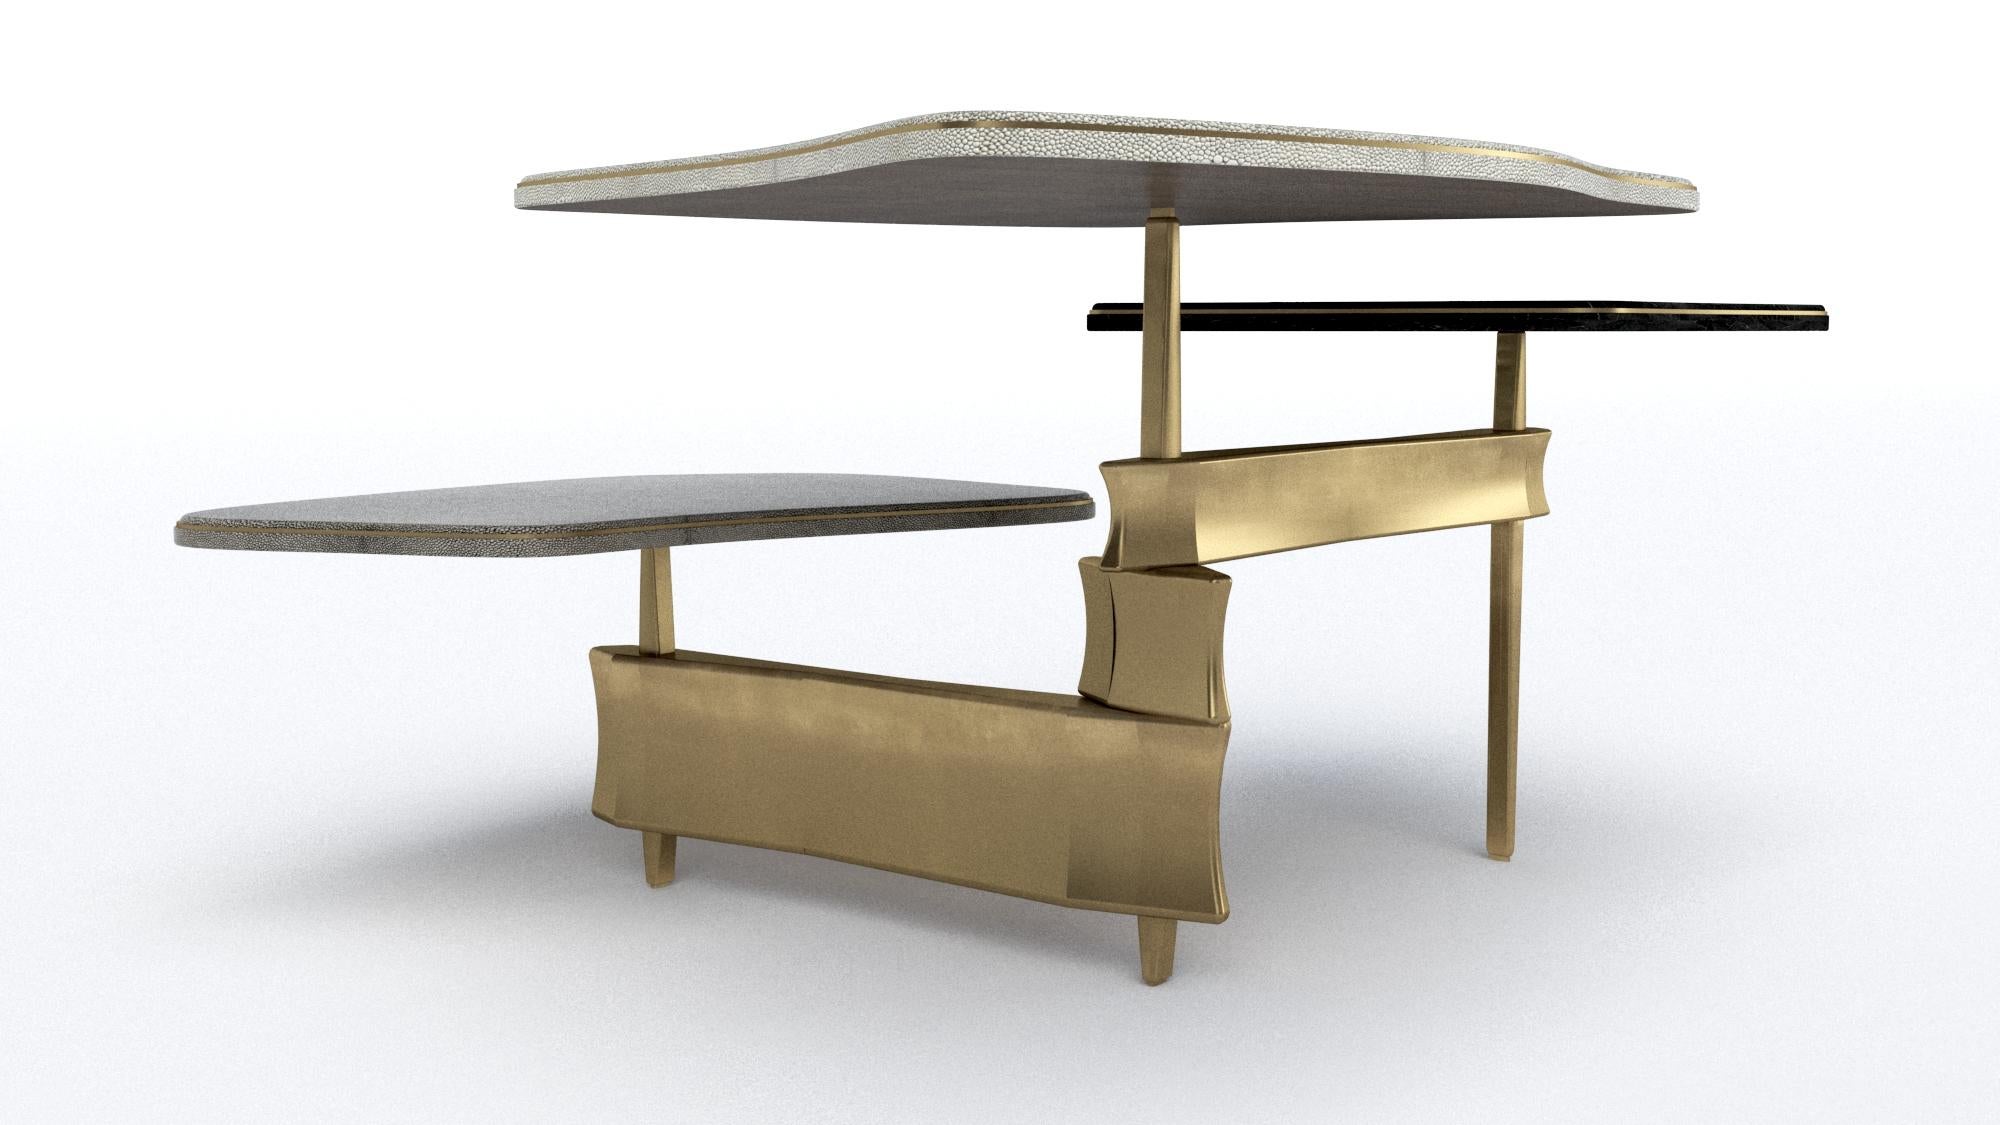 The Metropolis 3-top coffee table by Kifu Paris is a dramatic and sculptural design that demonstrates the incredible and signature artisanale work from her Augousti genes. The bronze-patina brass base of the coffee table is conceptually inspired by